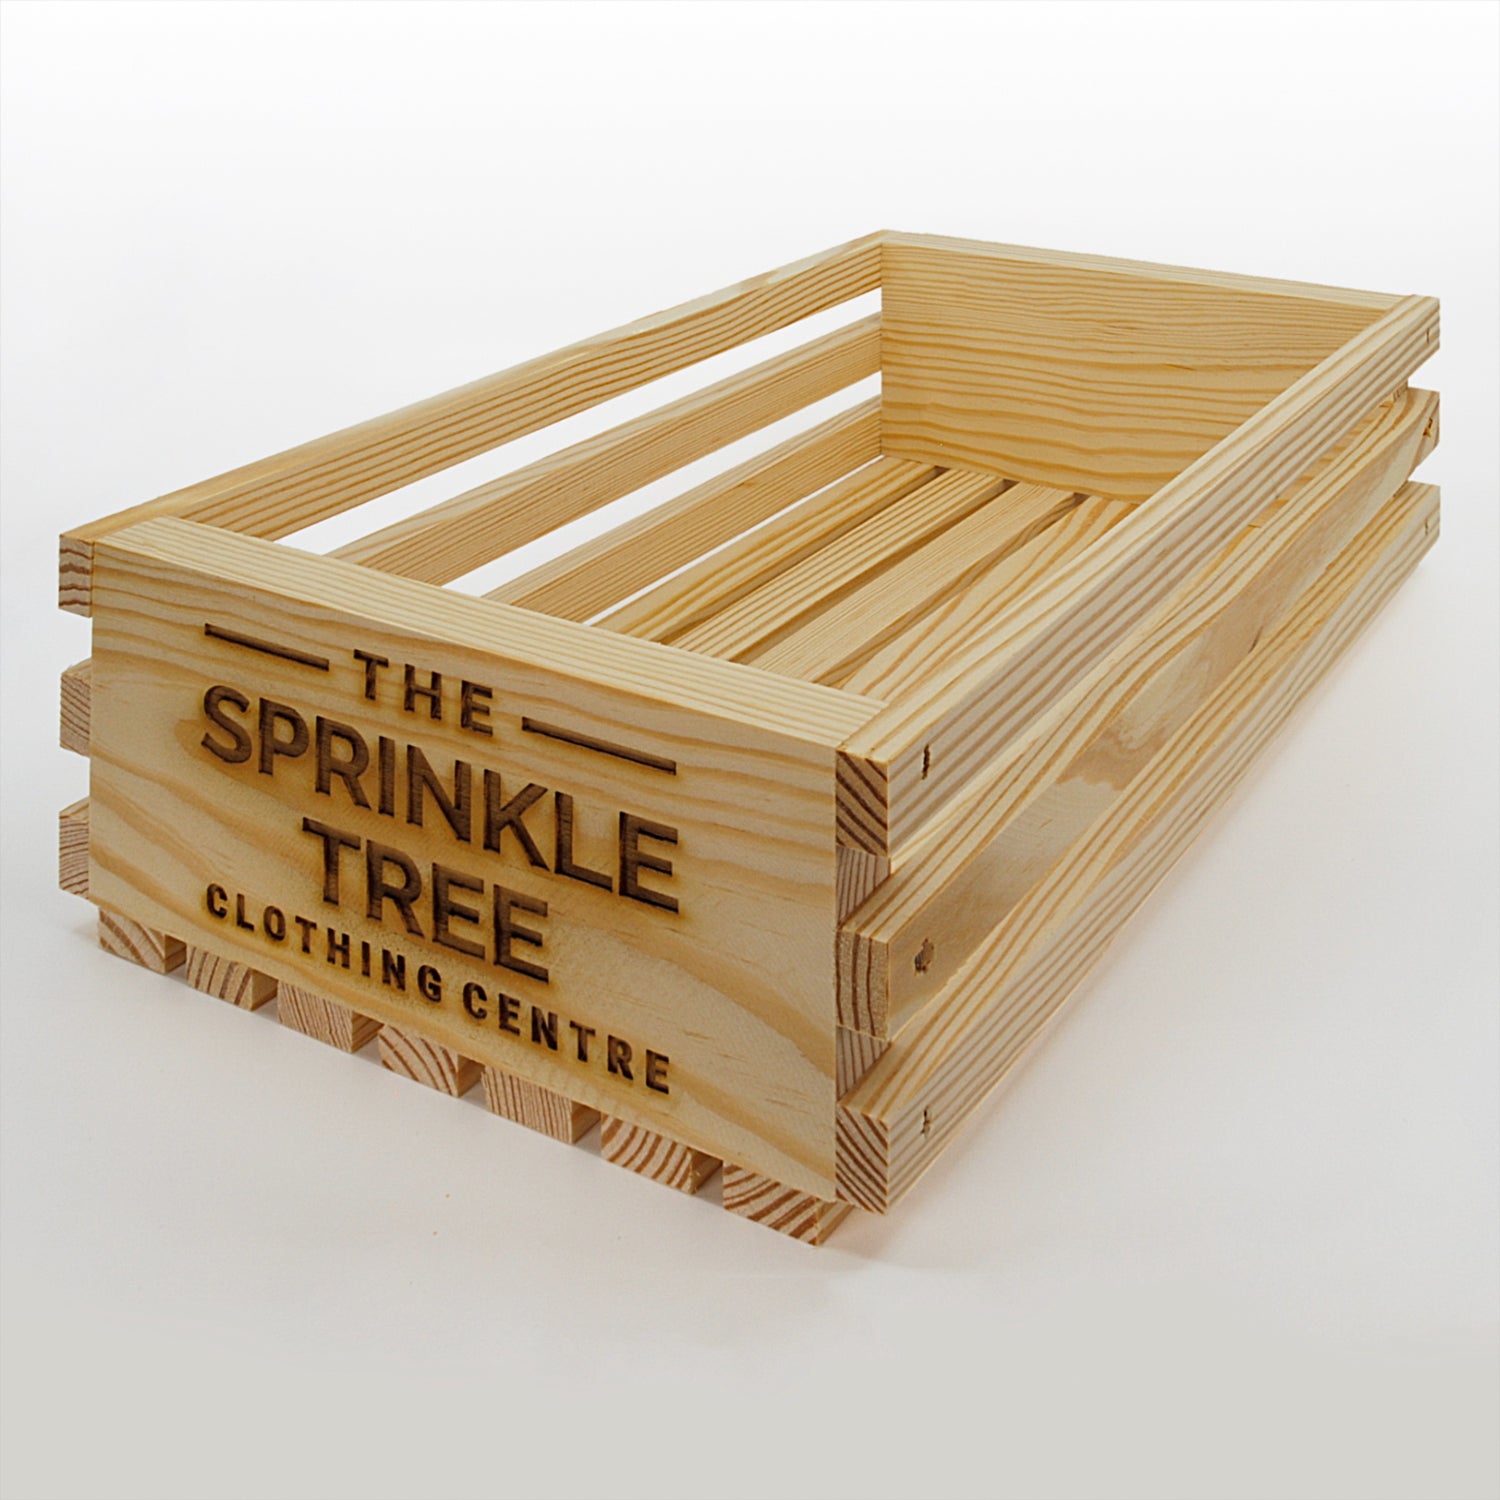 Personalized Wood Crates - North Rustic Design